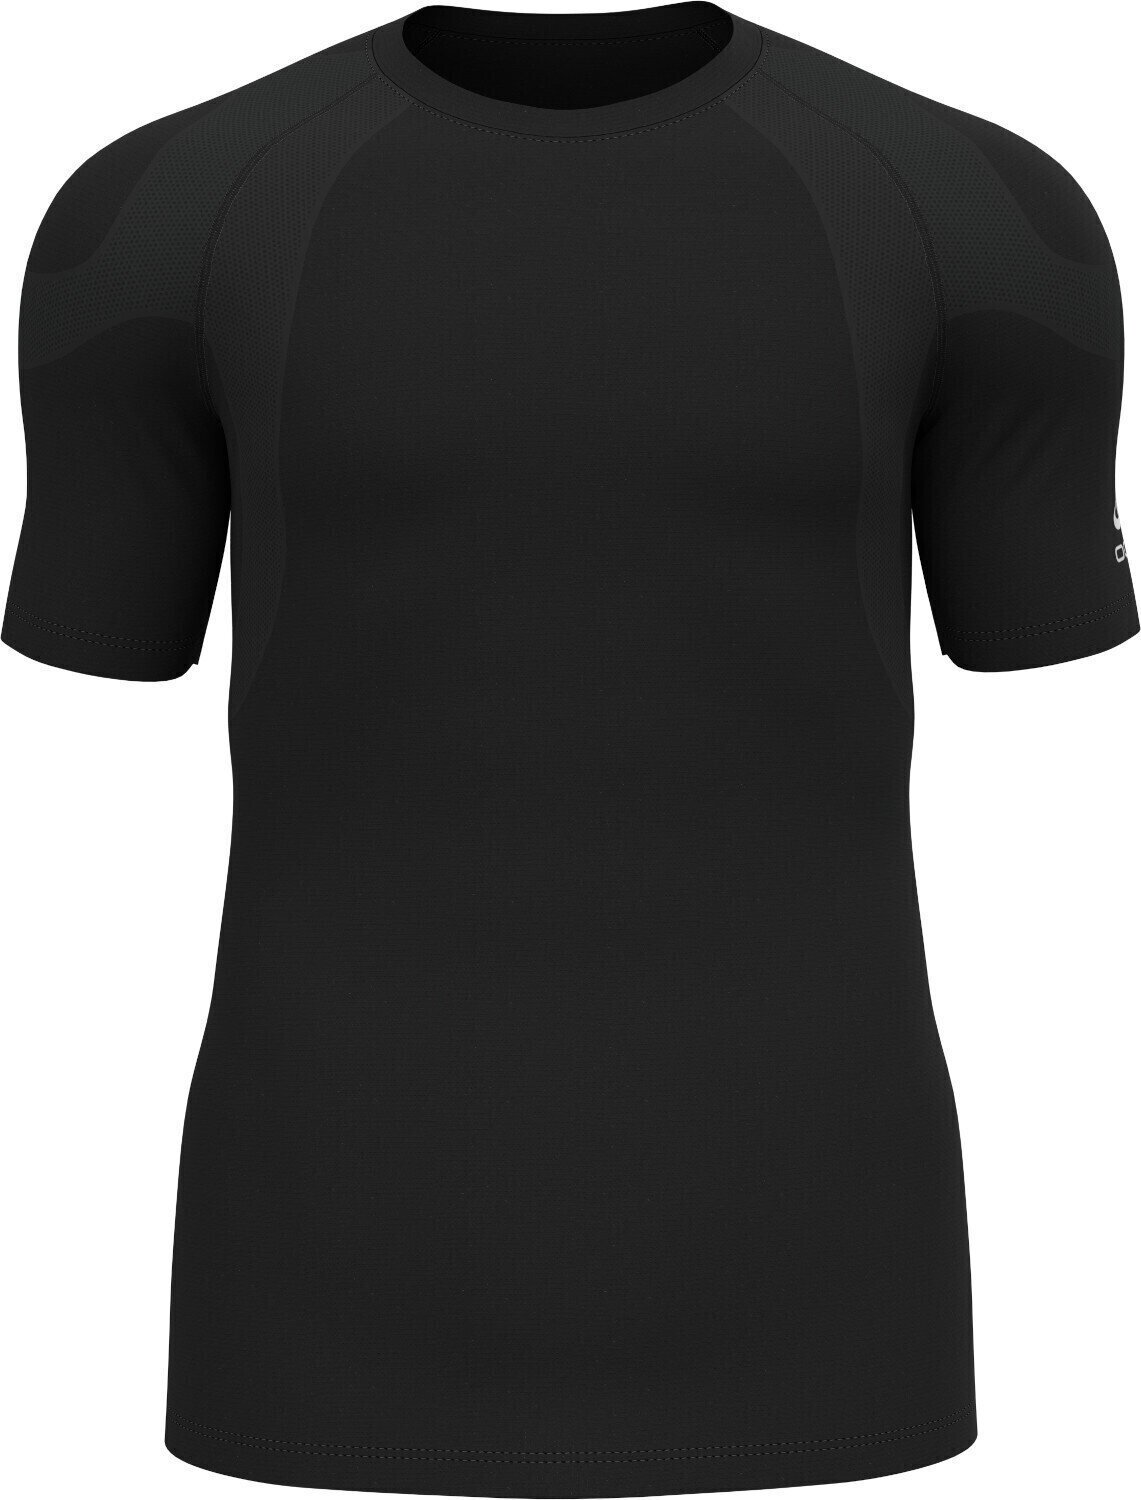 Running t-shirt with short sleeves
 Odlo Active Spine 2.0 T-Shirt Black XL Running t-shirt with short sleeves